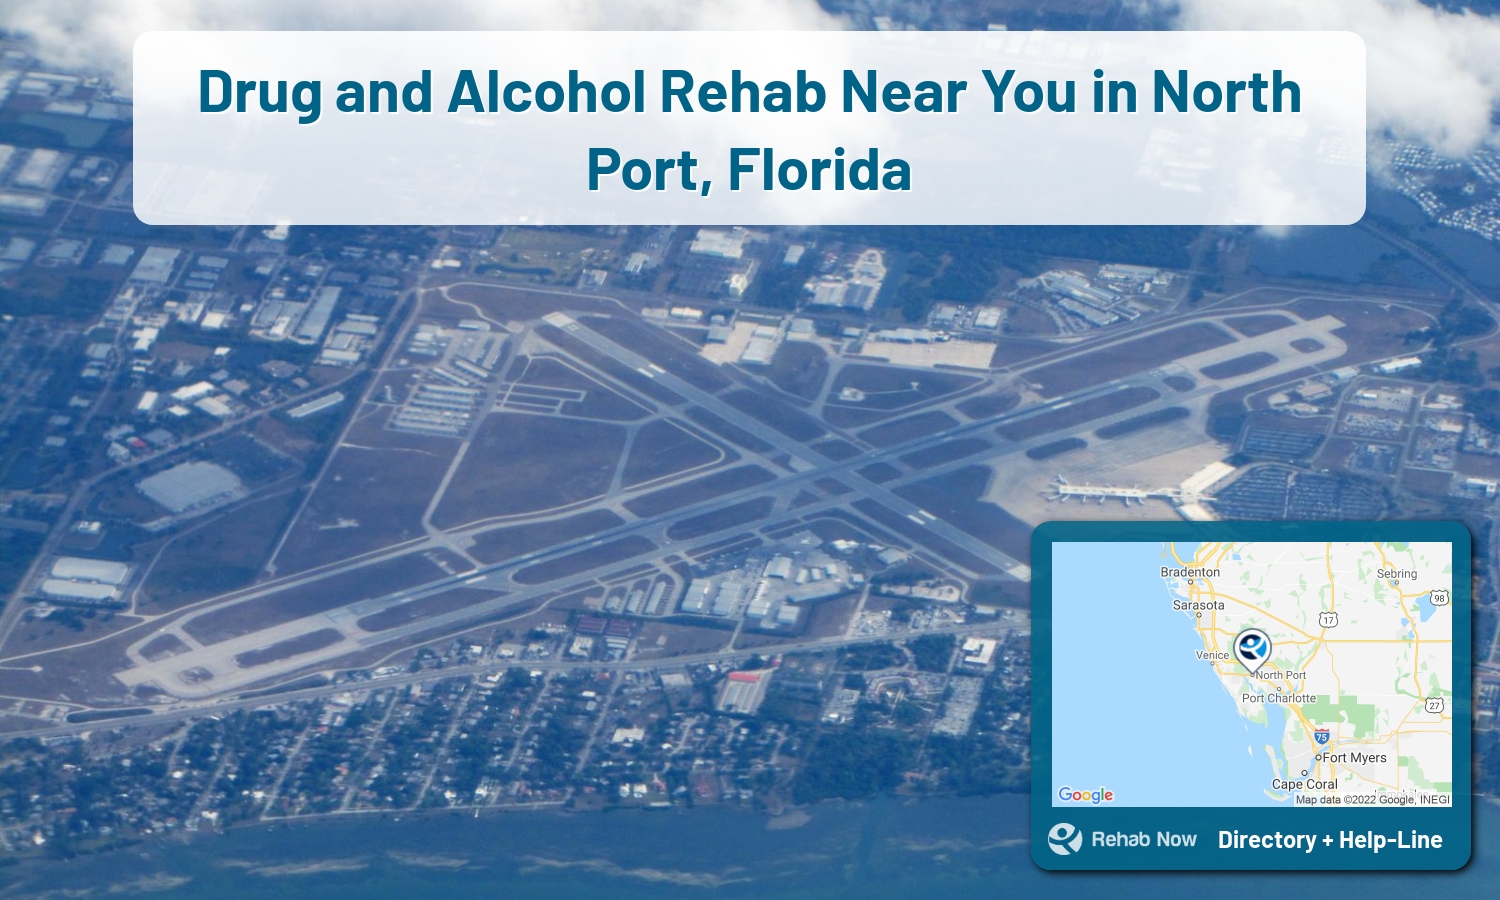 North Port, FL Treatment Centers. Find drug rehab in North Port, Florida, or detox and treatment programs. Get the right help now!